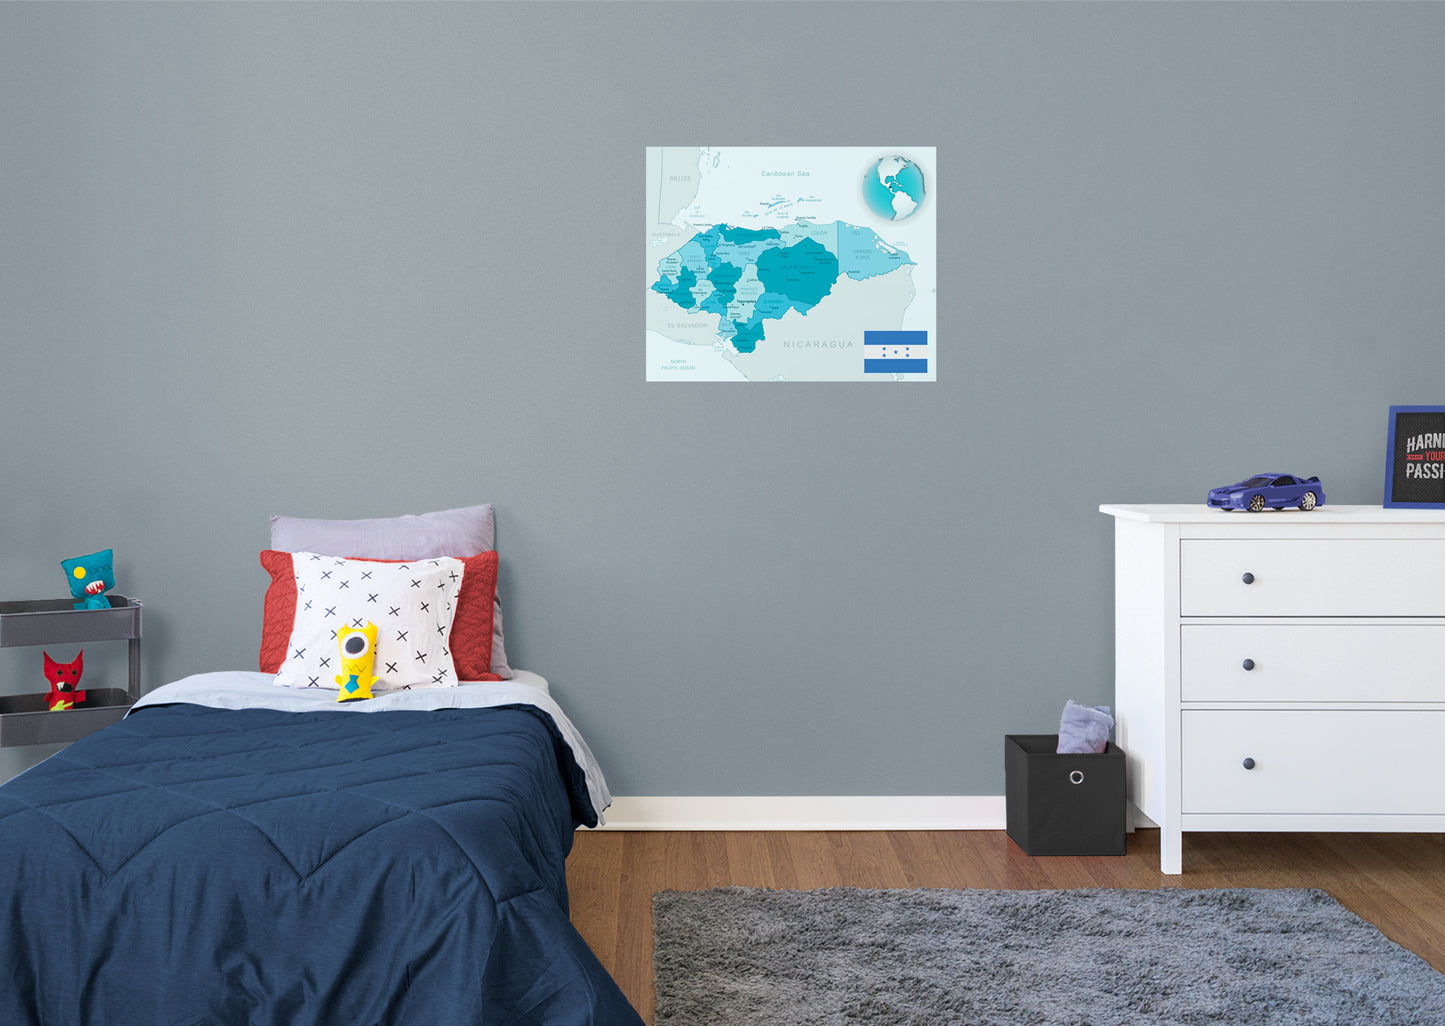 Maps of North America: Honduras Mural        -   Removable Wall   Adhesive Decal